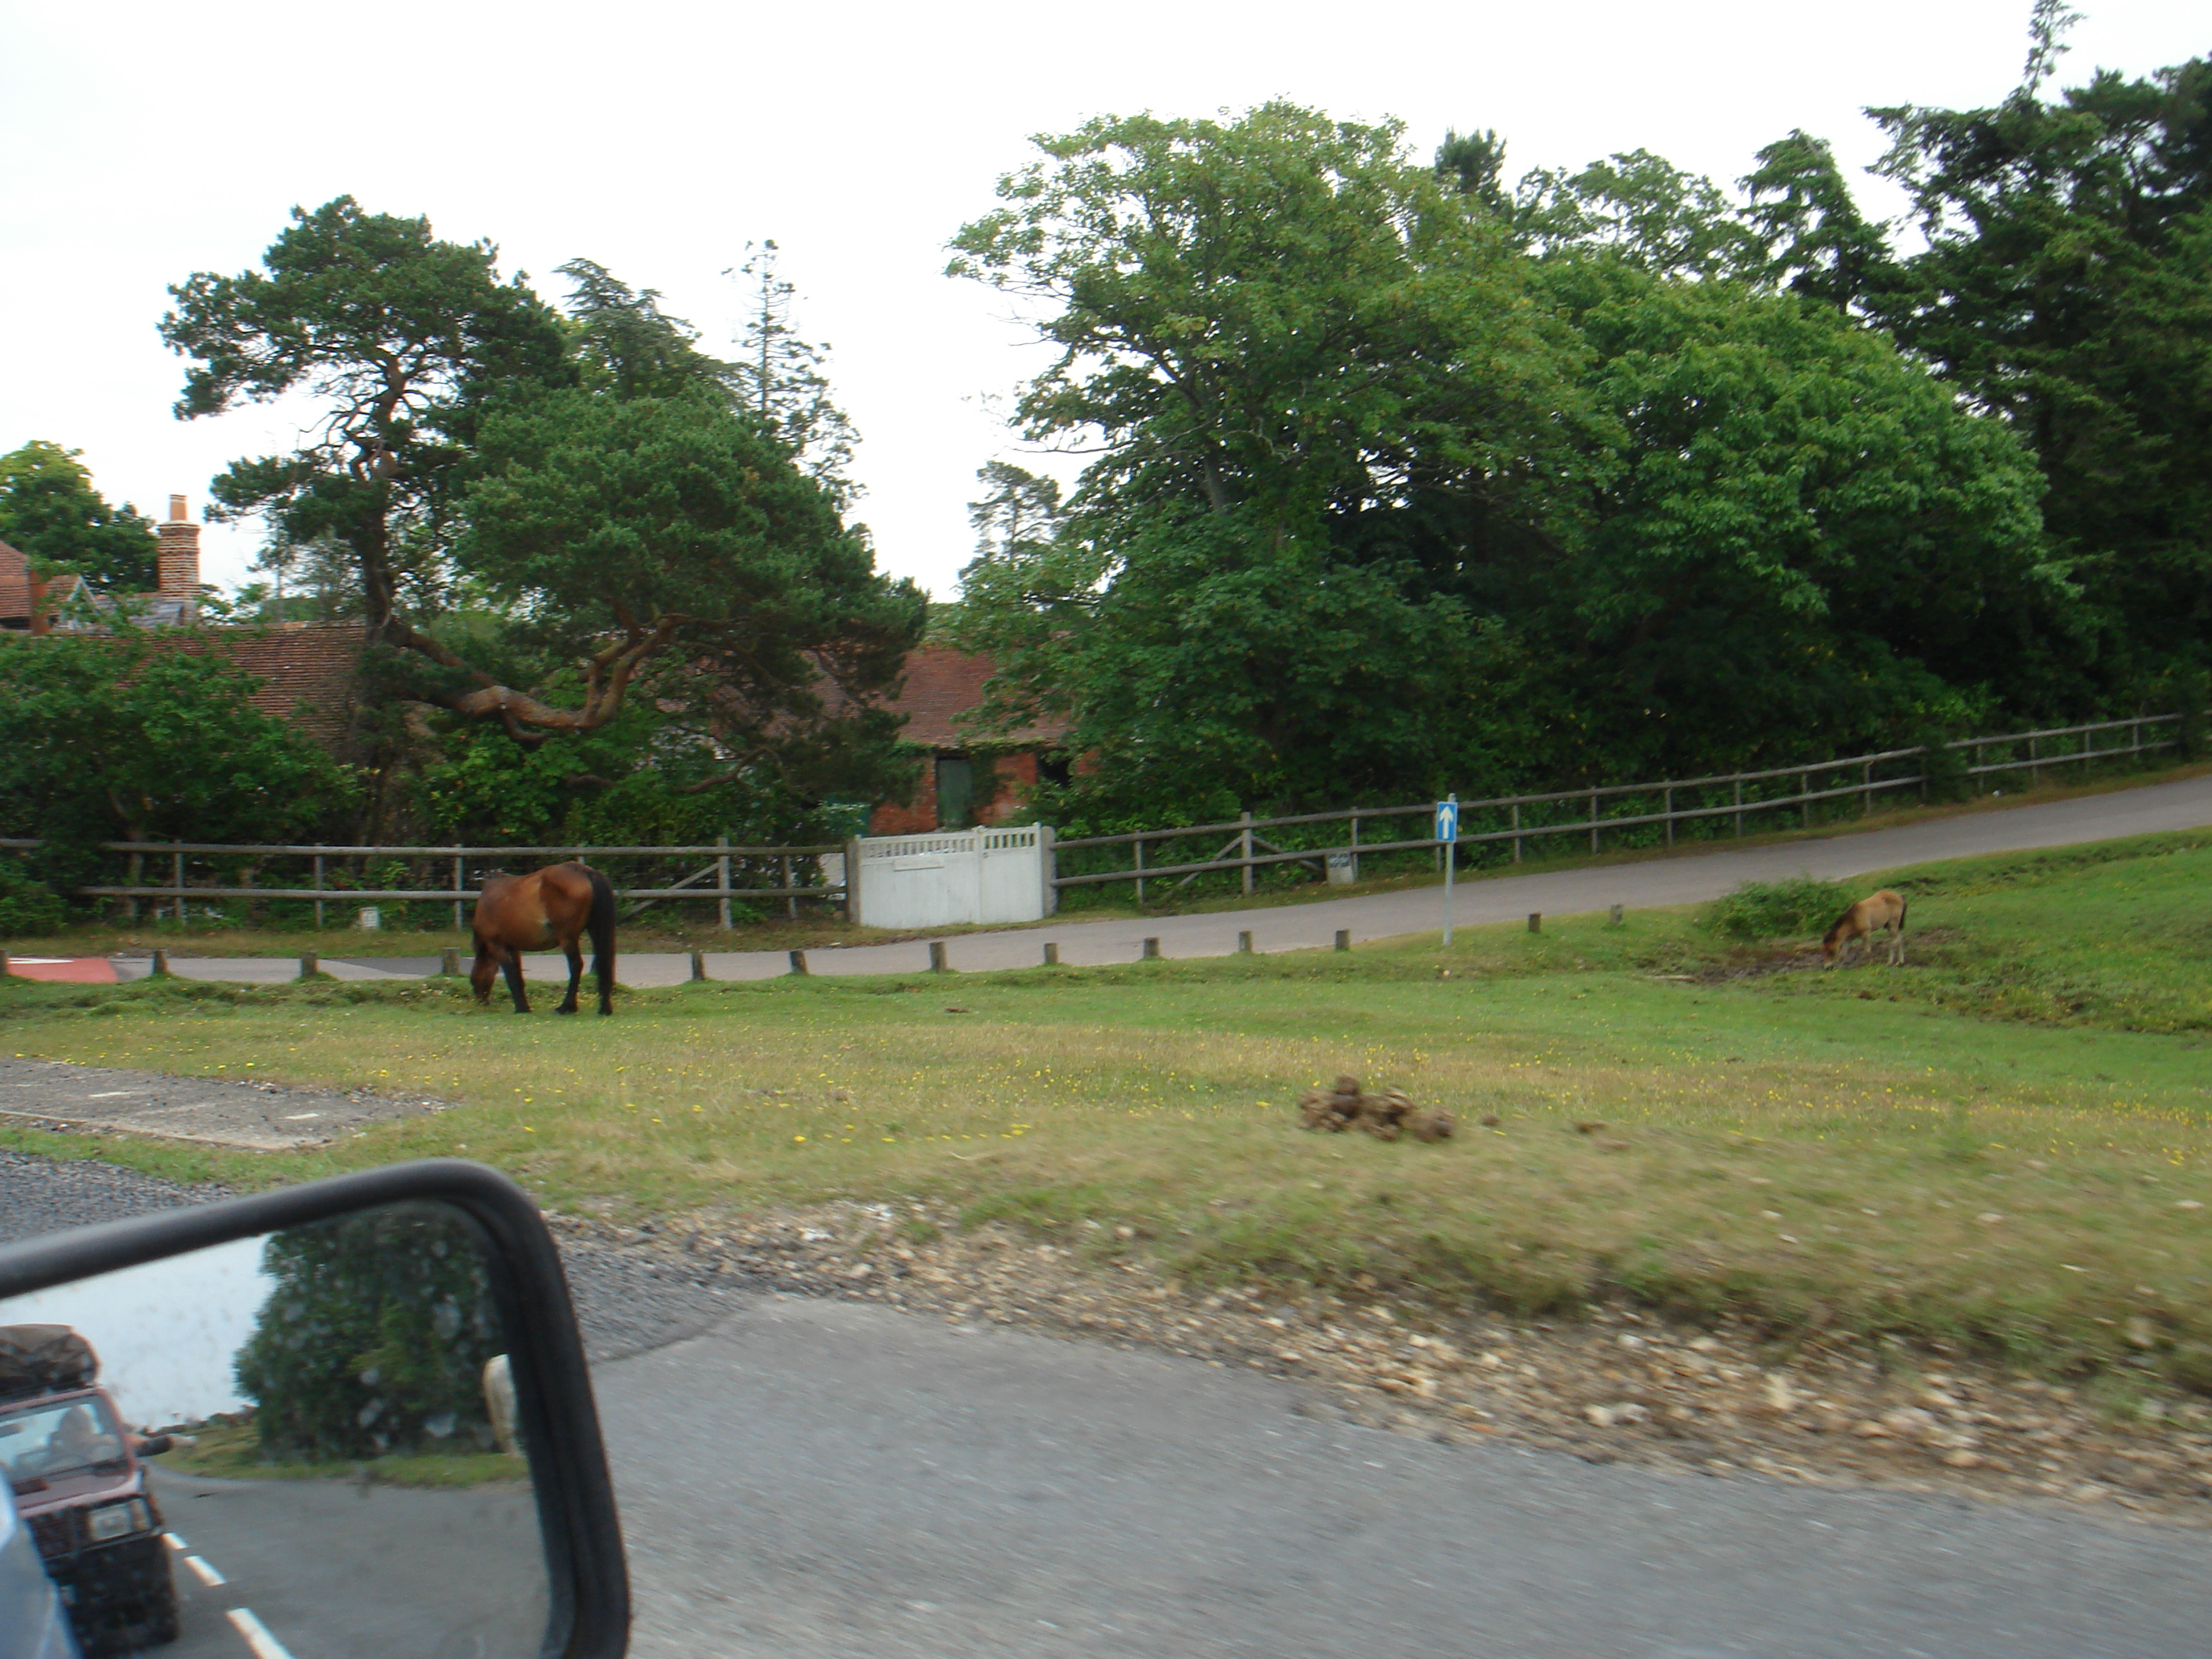 Convoy through New Forest to Beaulieu